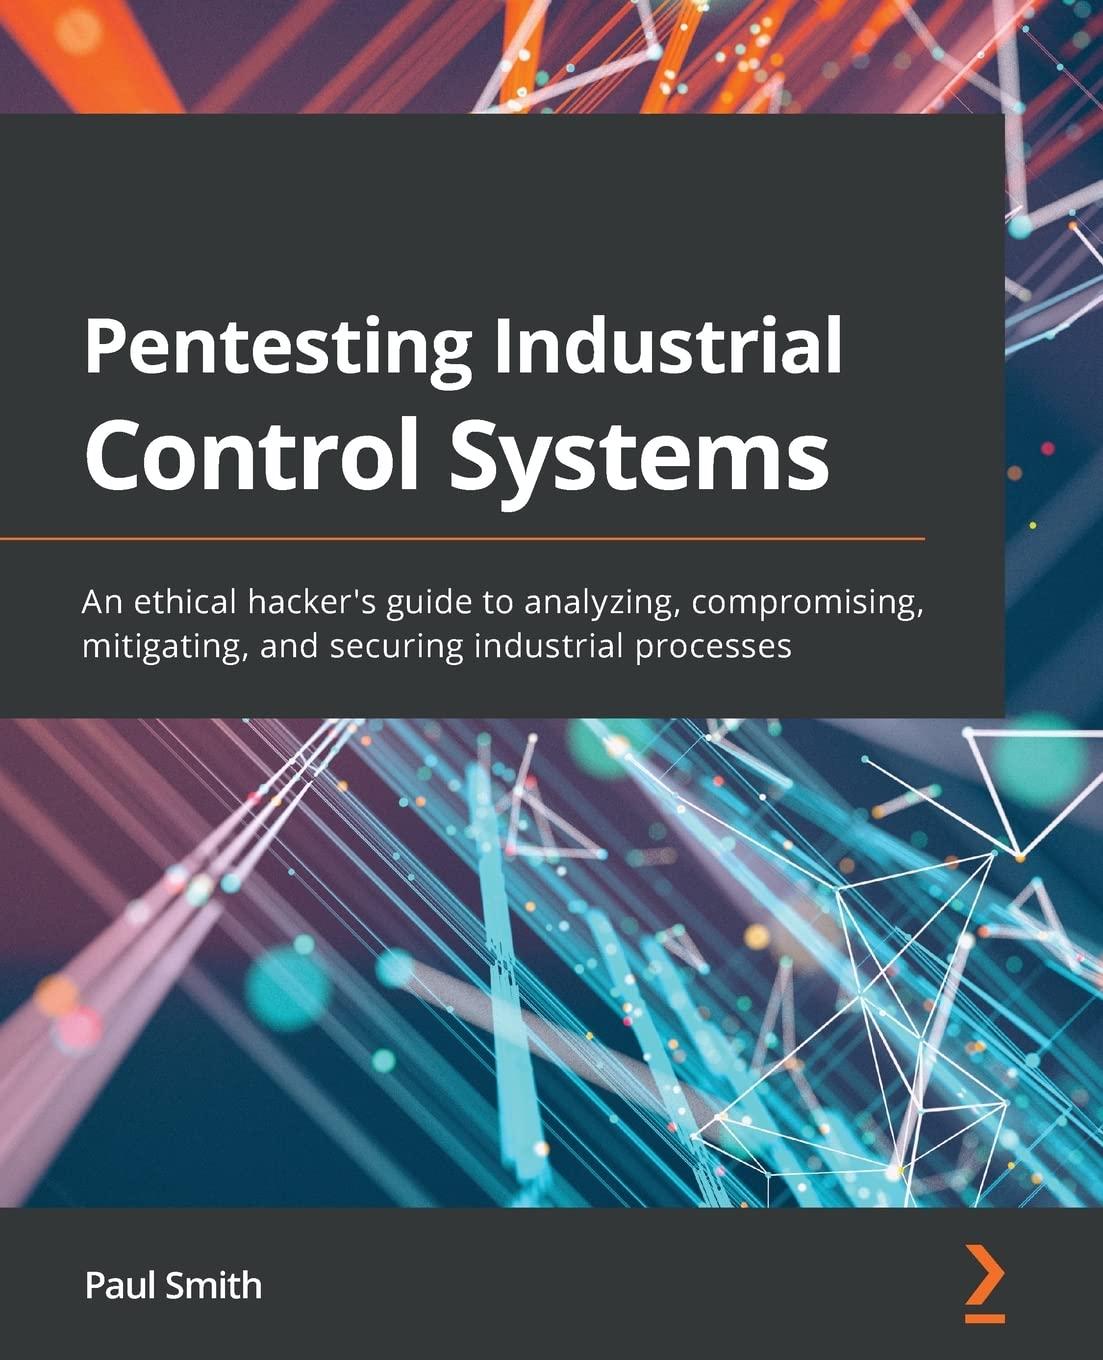 pentesting industrial control systems an ethical hacker's guide to analyzing compromising mitigating and